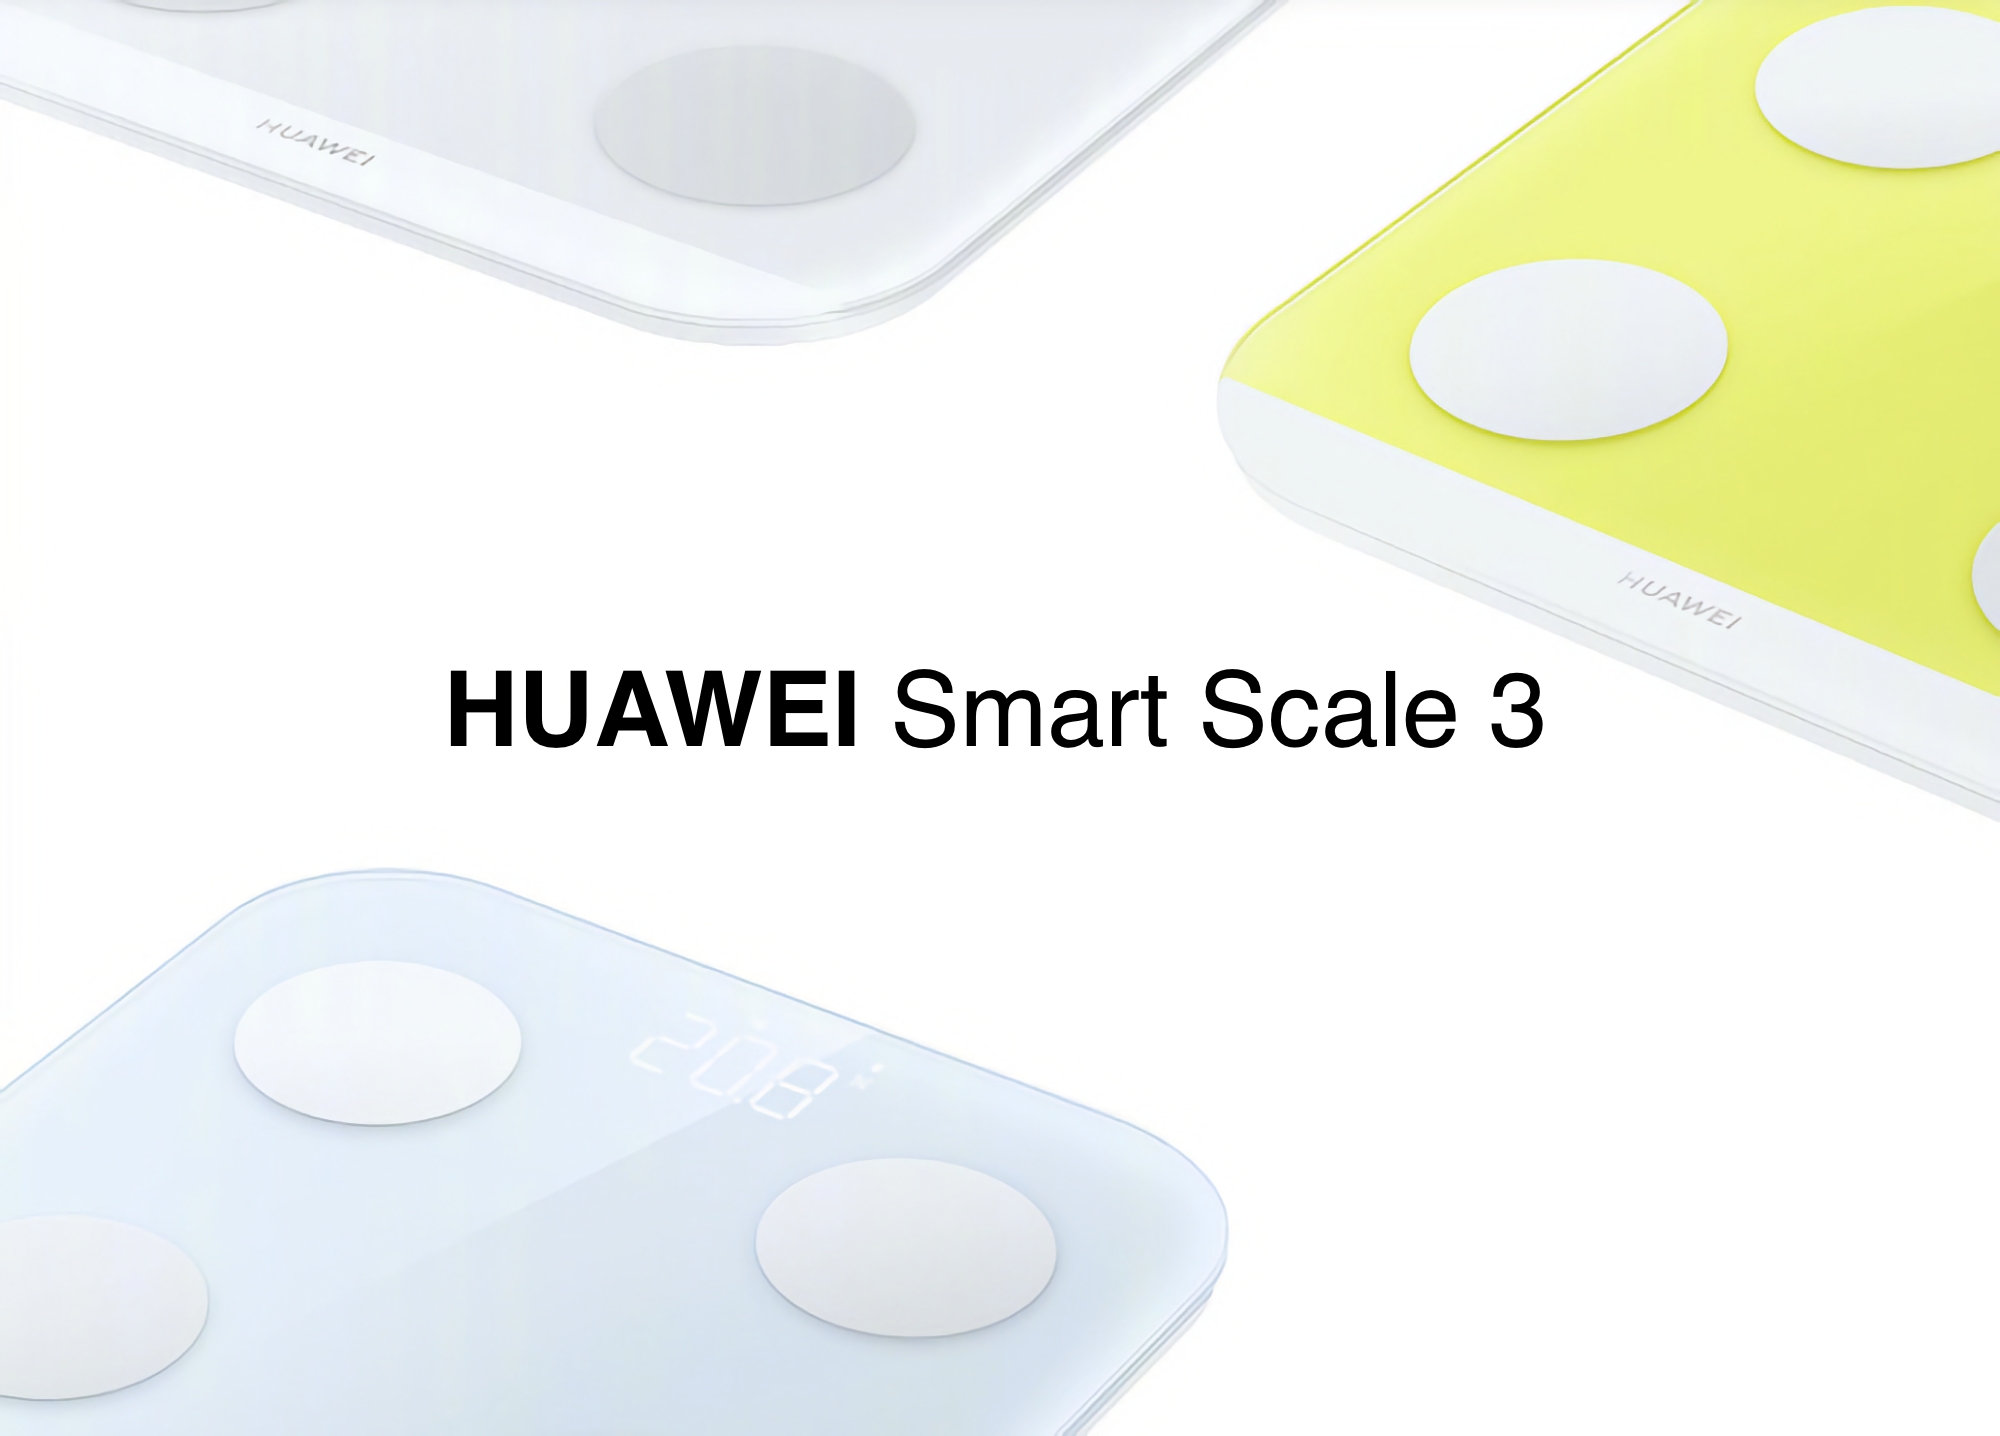 Huawei introduced a Bluetooth version of Smart Scale 3, the price is less than $20